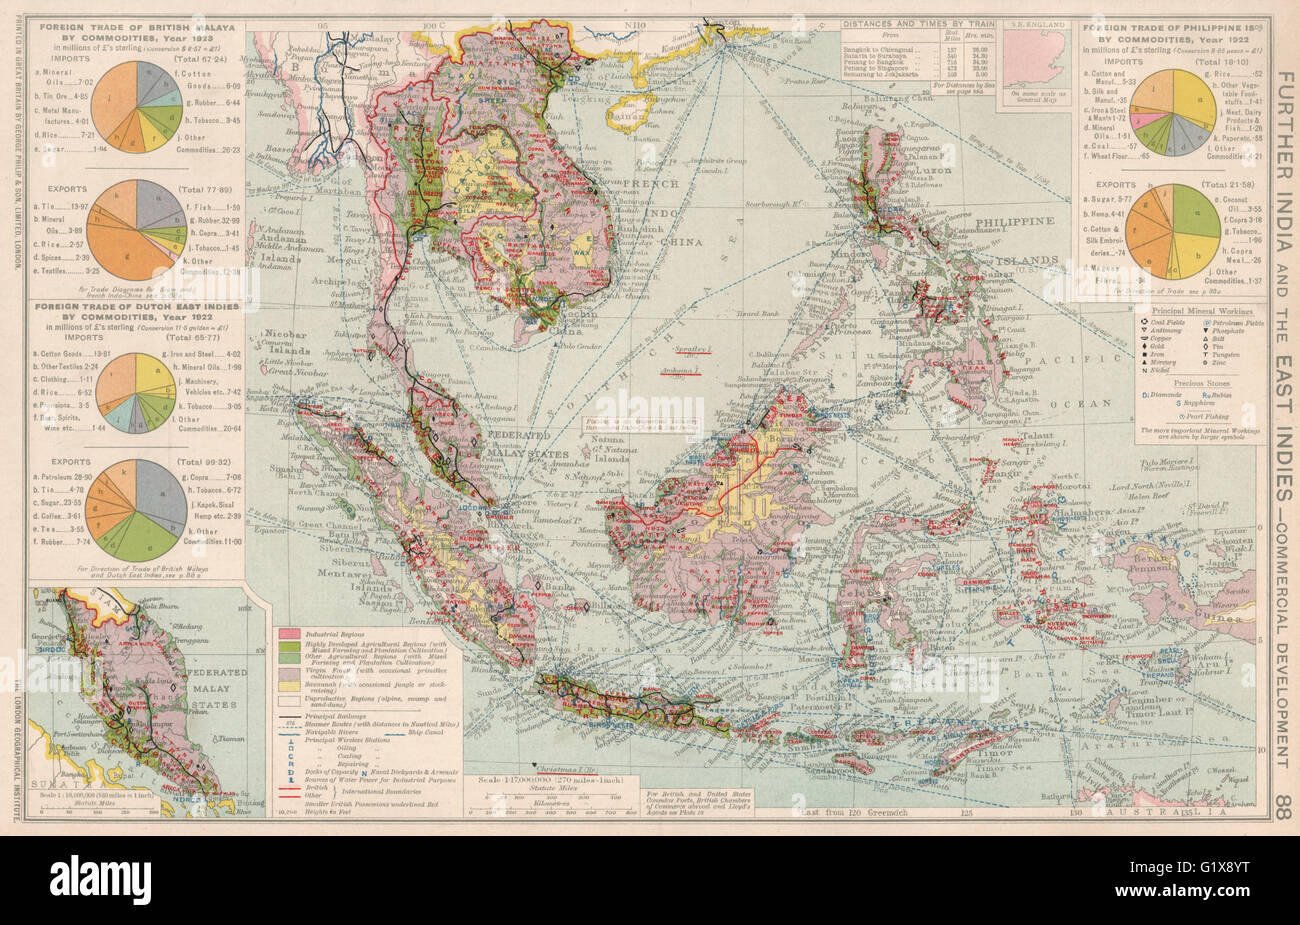 Indochina & East Indies. Commercial Mining Minerals Agricultural, 1925 old map Stock Photo